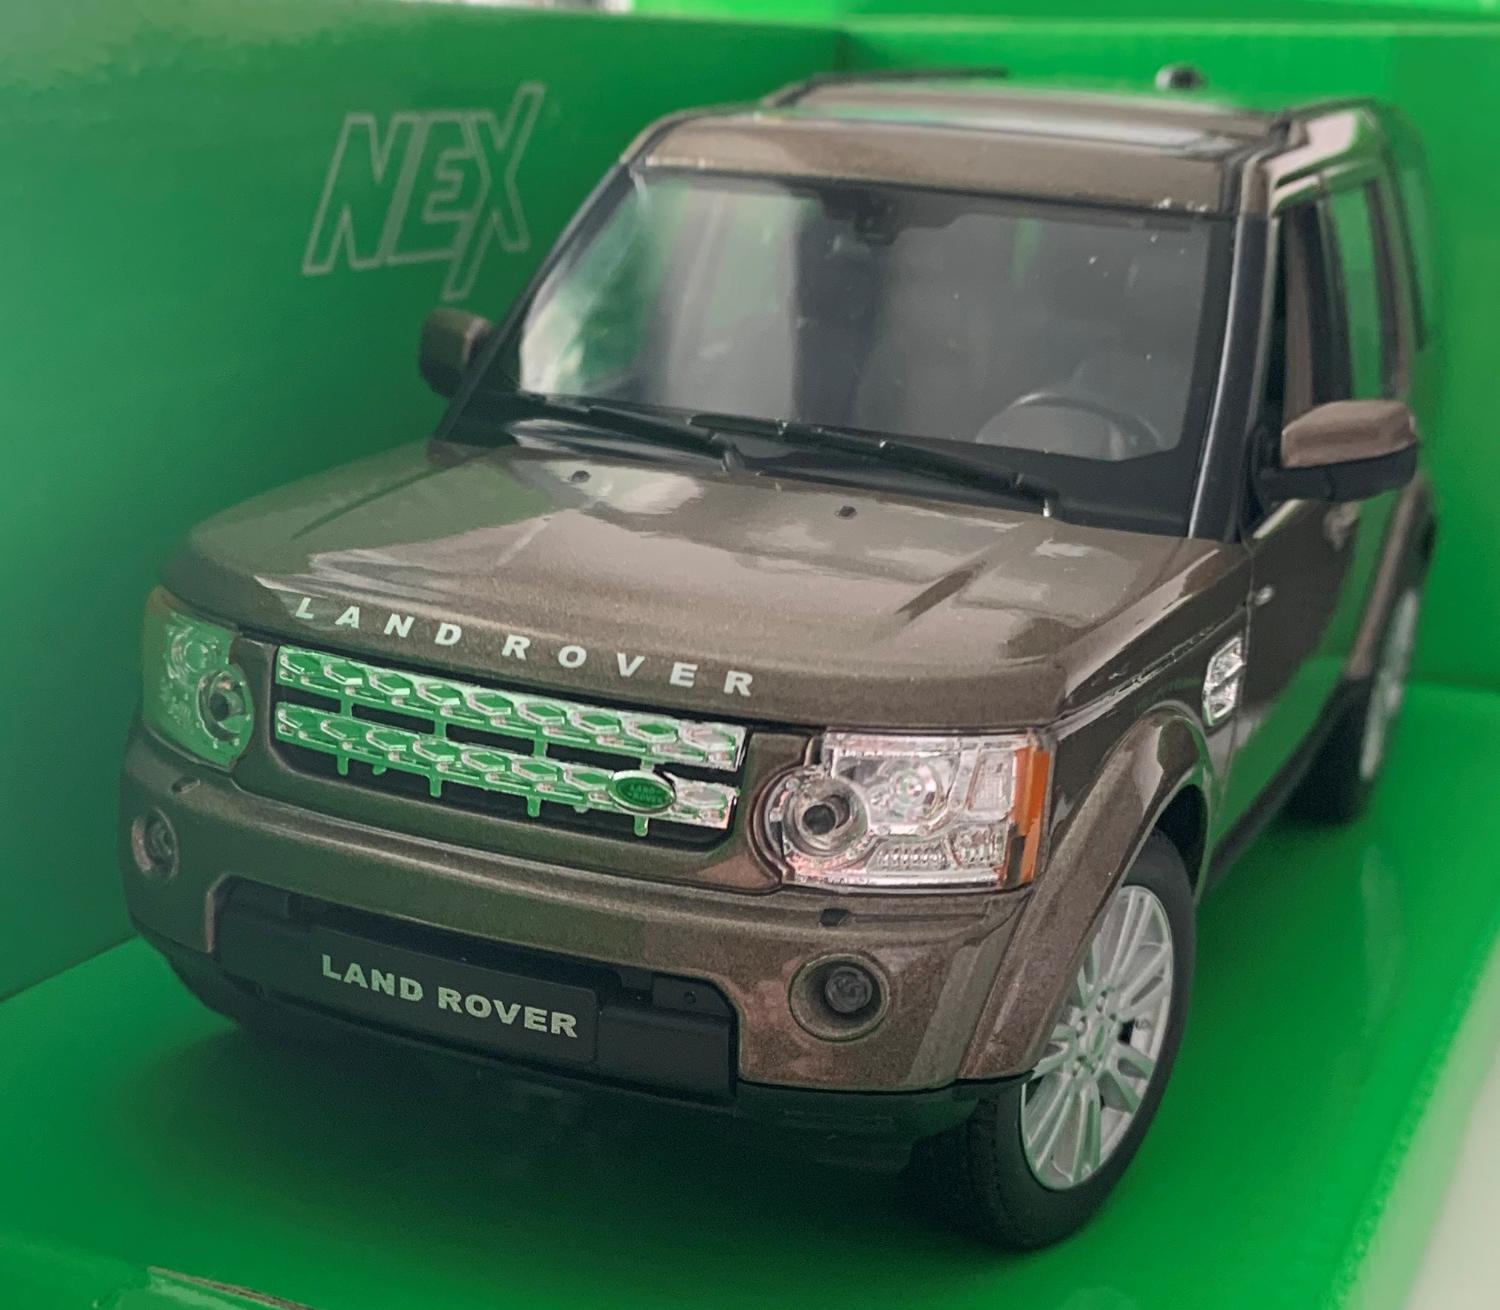 Land Rover Discovery in metallic brown 1:24 scale model from Welly